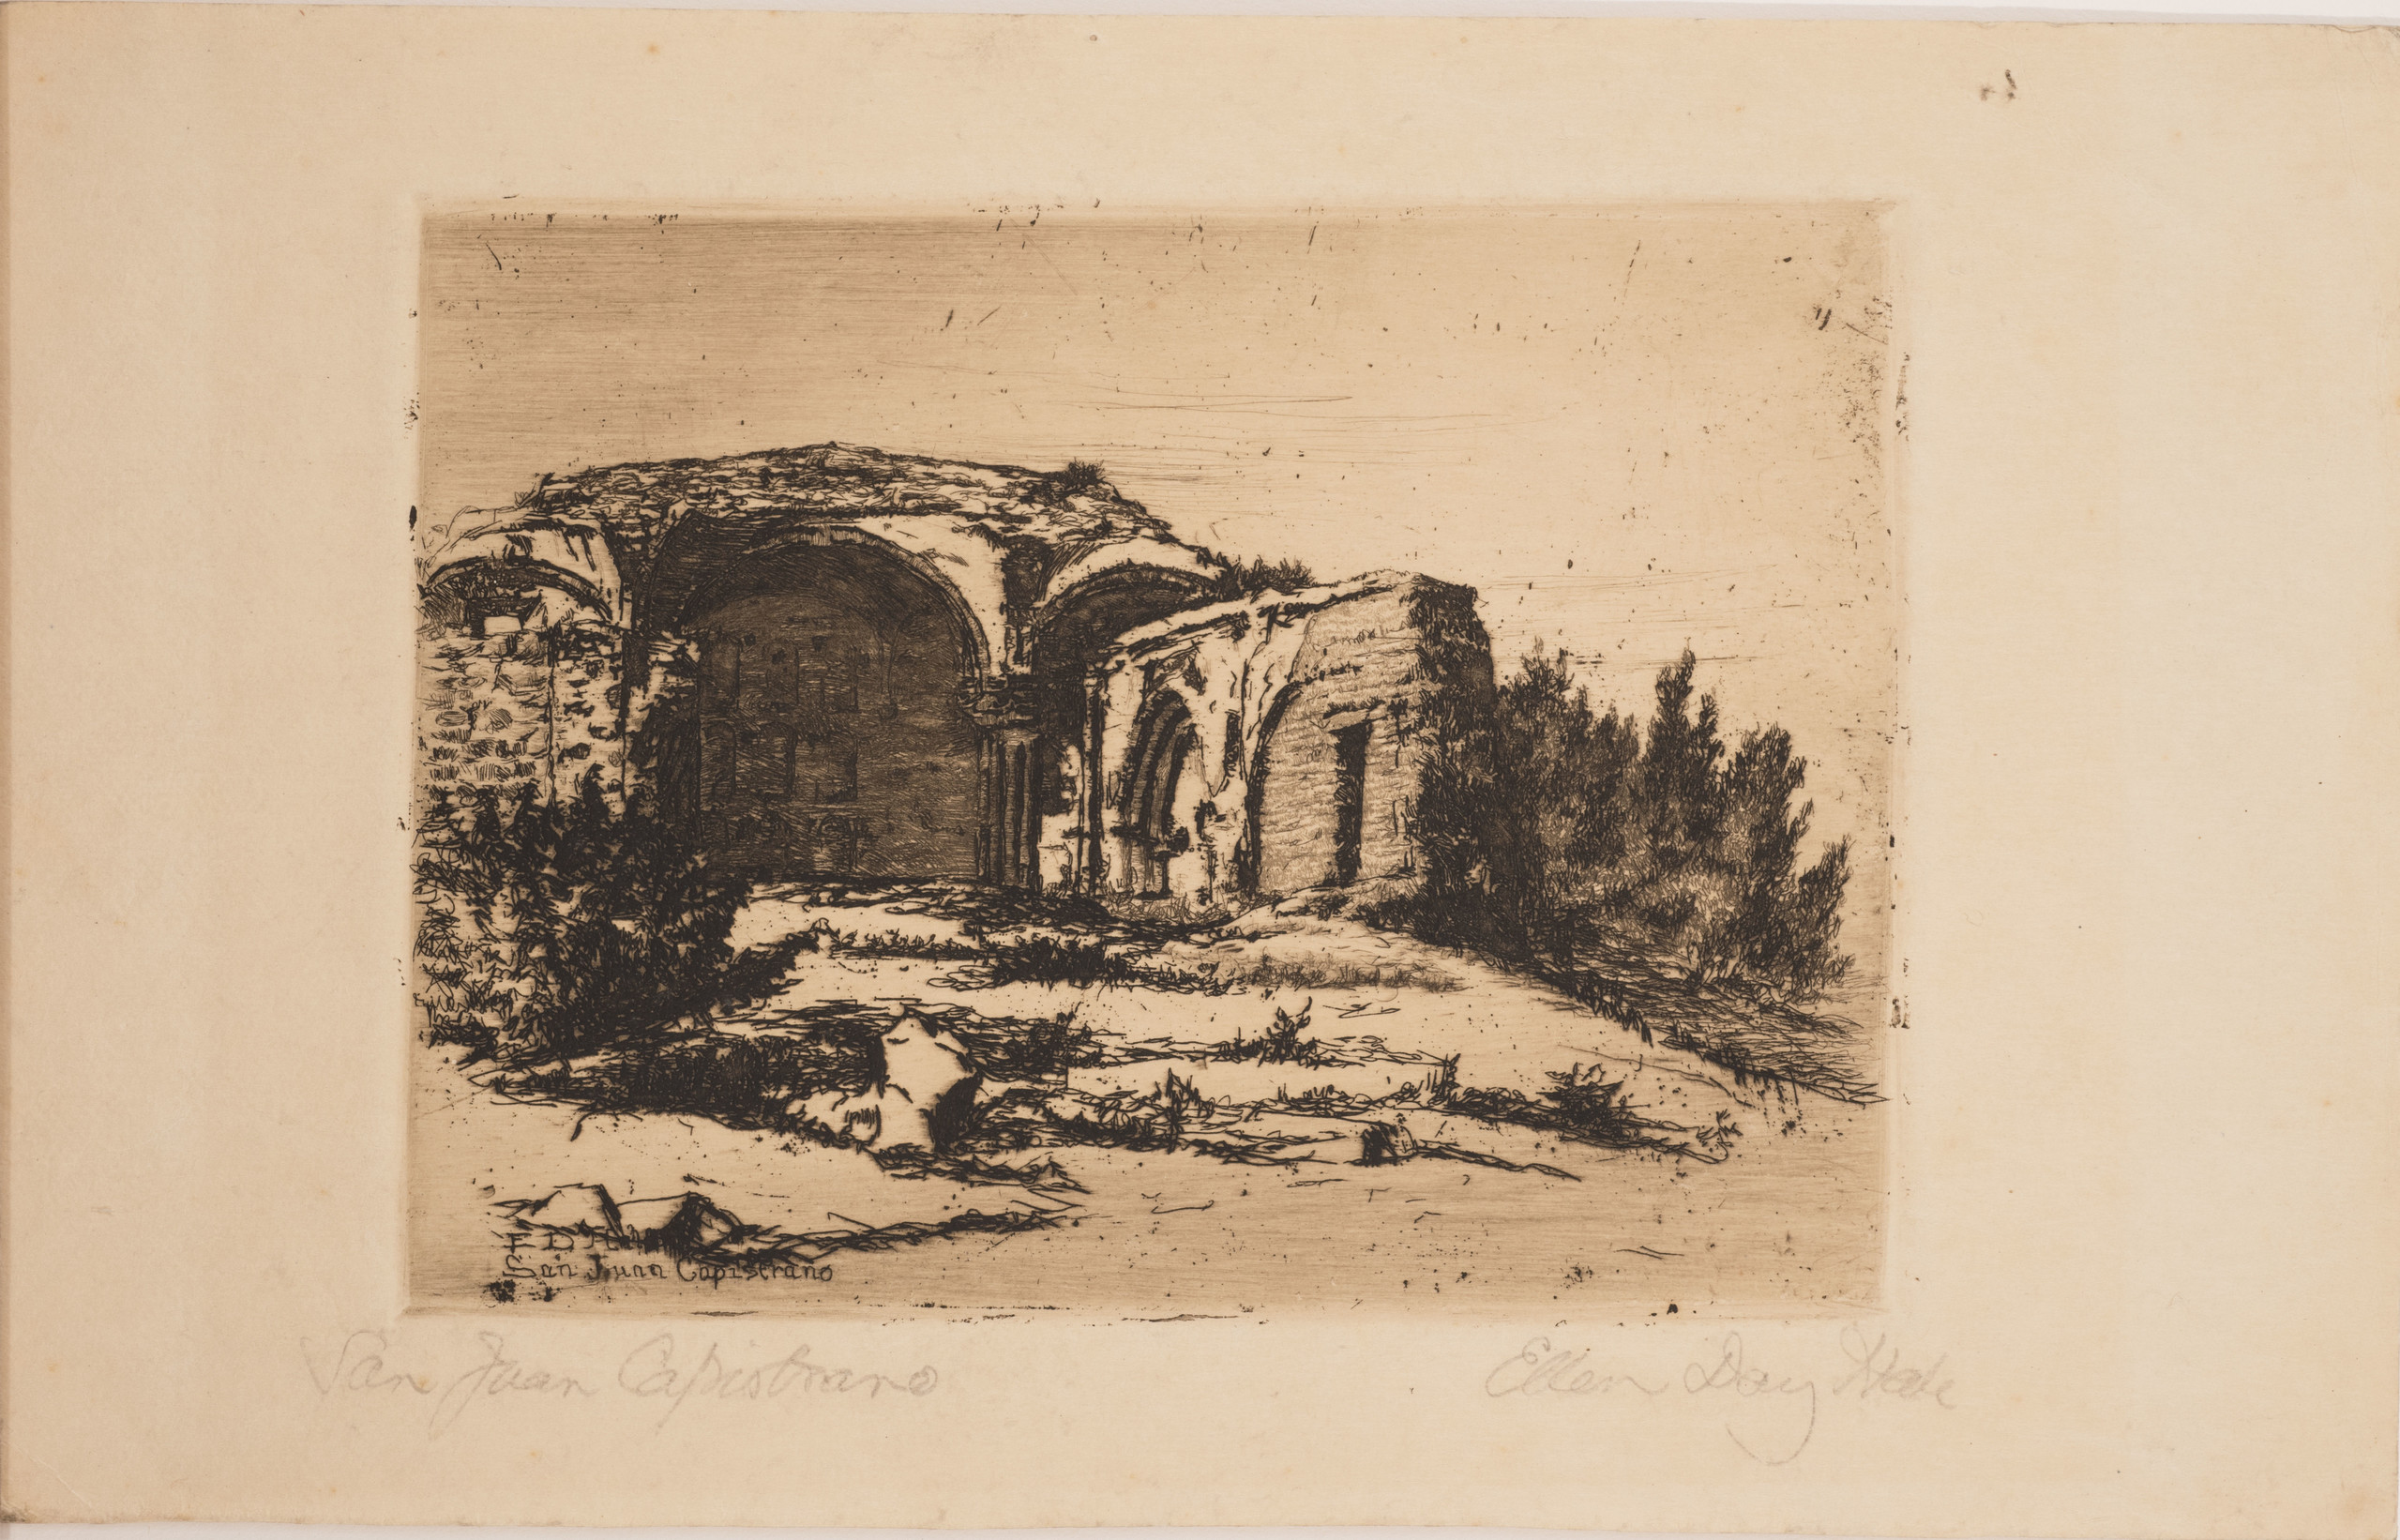 Small print of black ink on ecru paper depicting the ruins of an old Catholic mission building. The building, featuring rounded arches, crumbling facades, and exposed brick, is surrounded by scrub bushes and desert landscape.